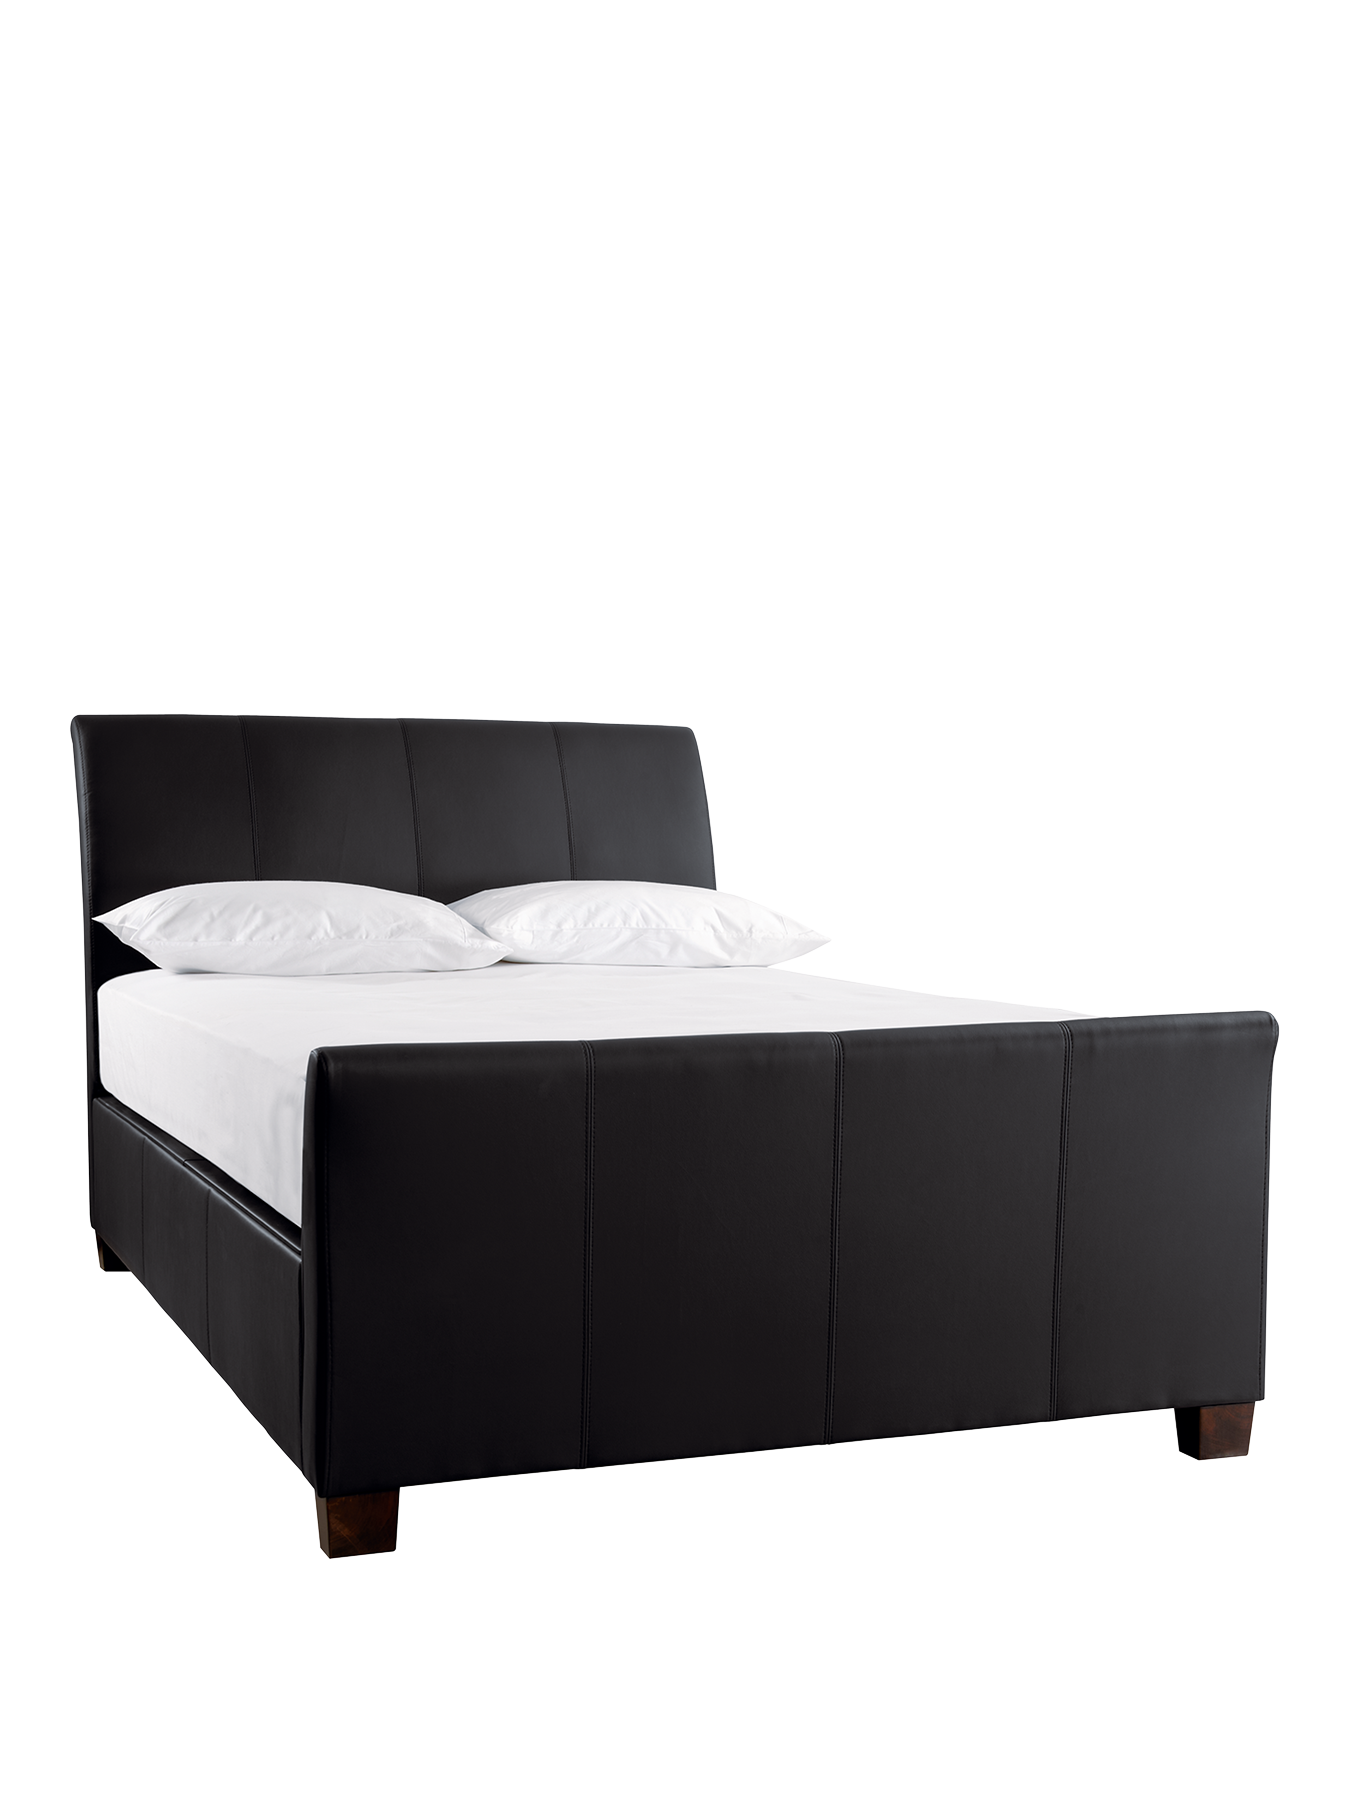 Idaho Leather Lift Up Bed Frame With Optional Mattress And Next